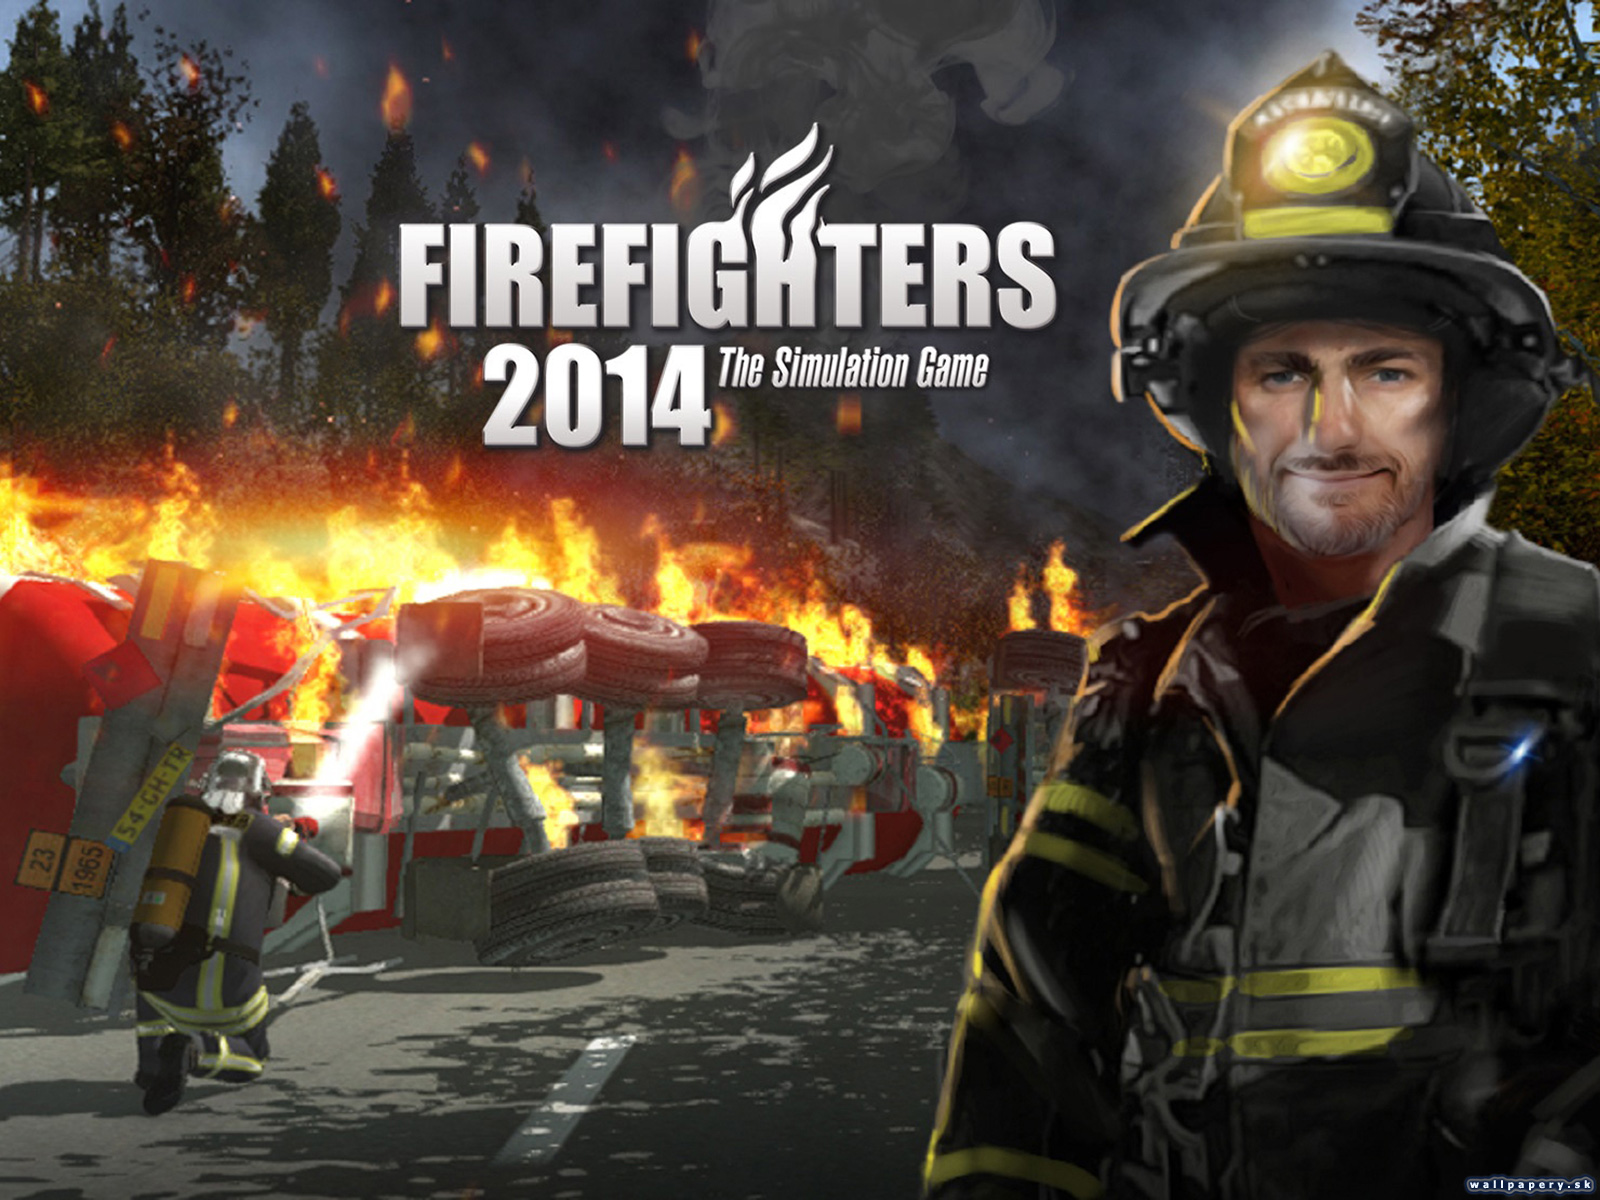 Firefighters 2014: The Simulation Game - wallpaper 1